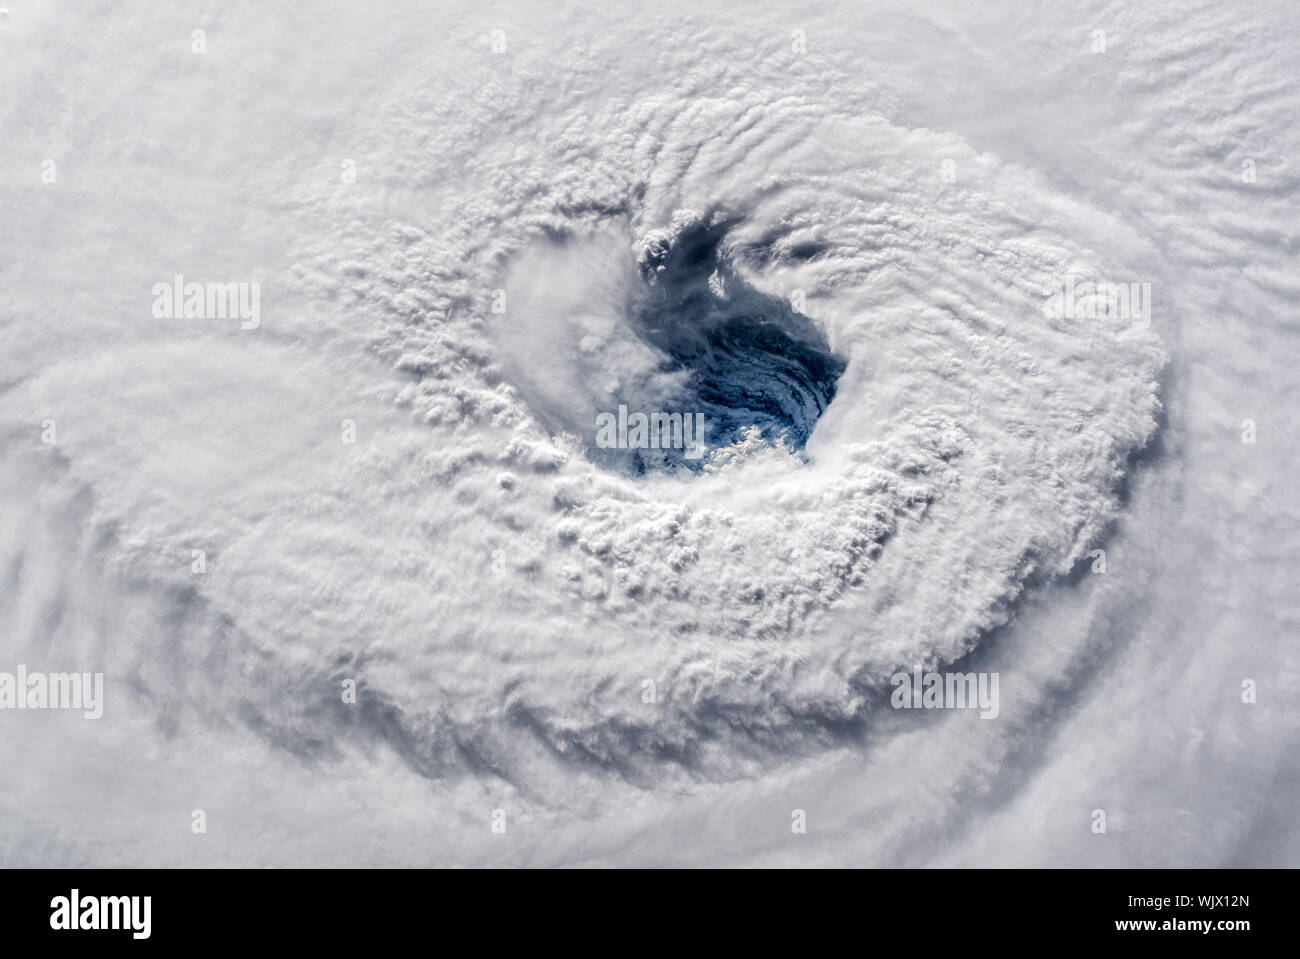 NASA International Space Station (ISS) view of the eye of Hurricane Florence photographed by astronaut Alex Gerst on September 12, 2018. Stock Photo